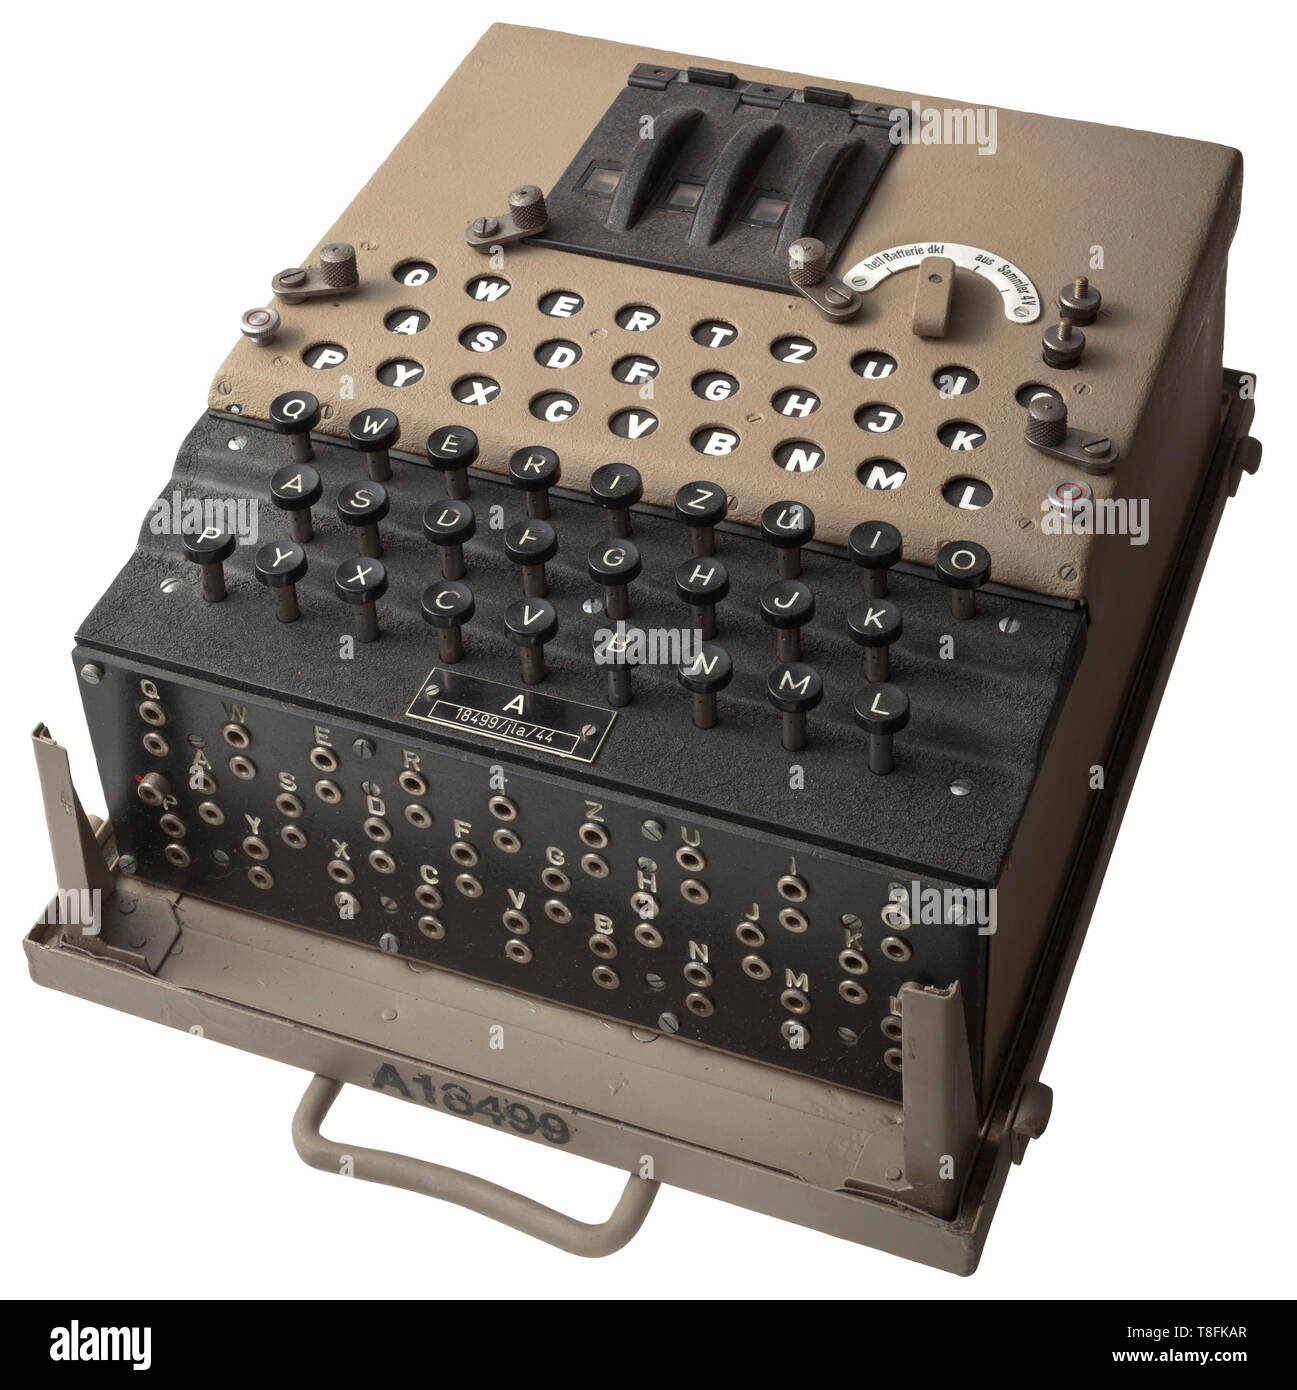 A German cypher machine 'Enigma' of the Wehrmacht with three rotors Iron housing, the folding lid with the lit keyboard, the connections for the external power supply and the alteration switch. Thereunder the three numeric encryption scrambling rotors with the numbers from 1 to 26, the lamp board with the 12 mm light bulbs (incomplete) and the battery compartment. In front of that the keyboard and the plugboard on the front side. No substitute plugs. In the removable vehicle storage box for the intelligence mounting frame, for example for the intelligence Kübelwagen Sd.Kfz., Editorial-Use-Only Stock Photo